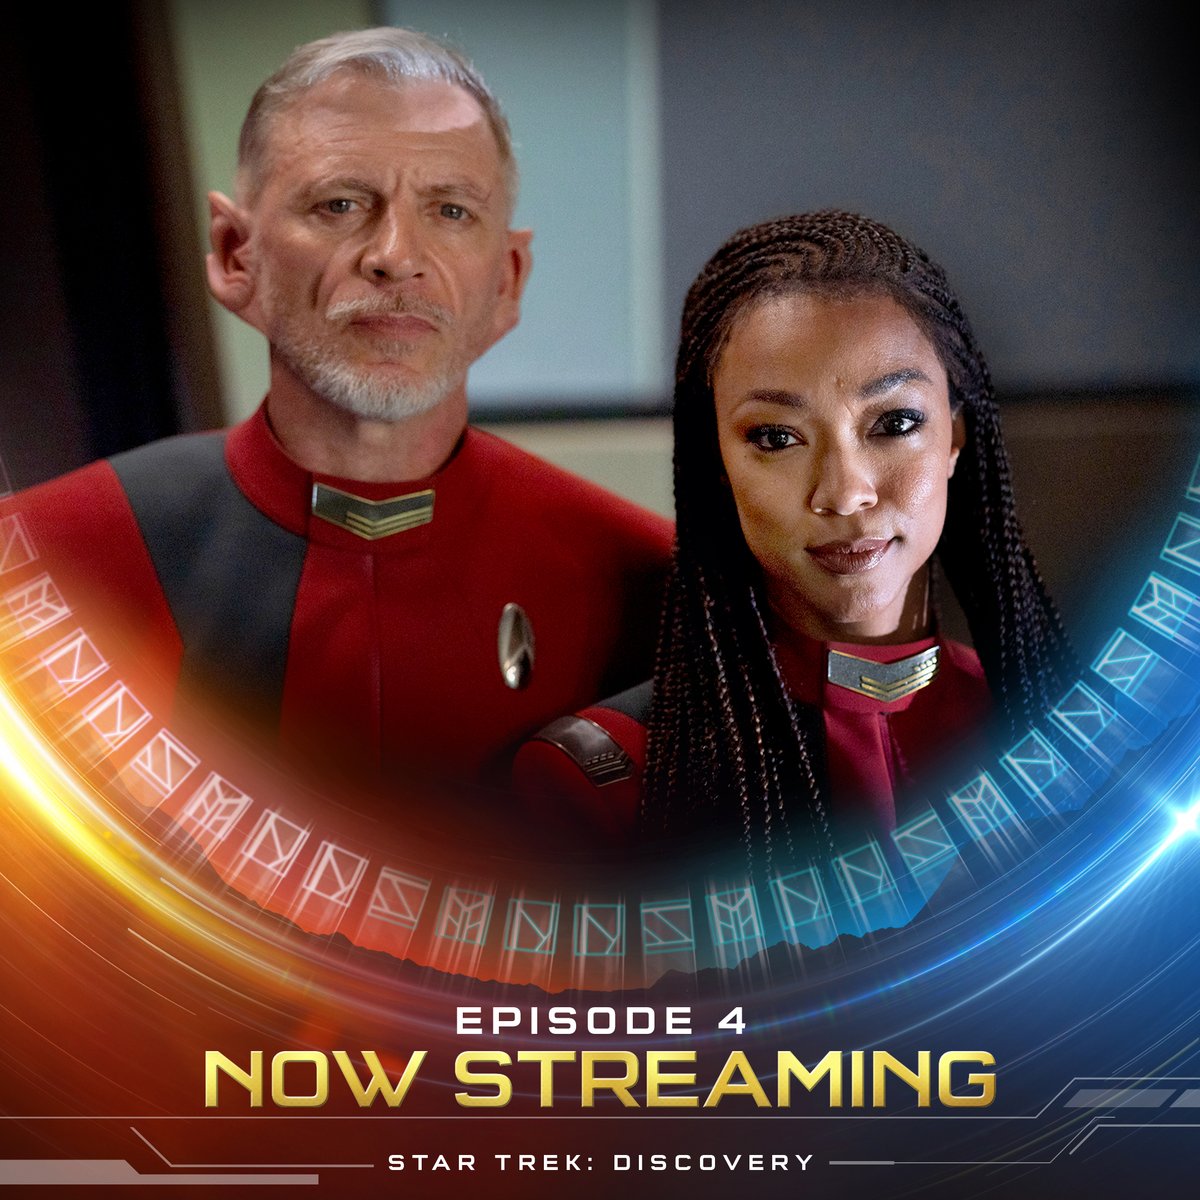 Encountering a time loop might just be one of the most puzzling scenarios yet for the Discovery crew. Stream the new episode of #StarTrekDiscovery on @ParamountPlus today!